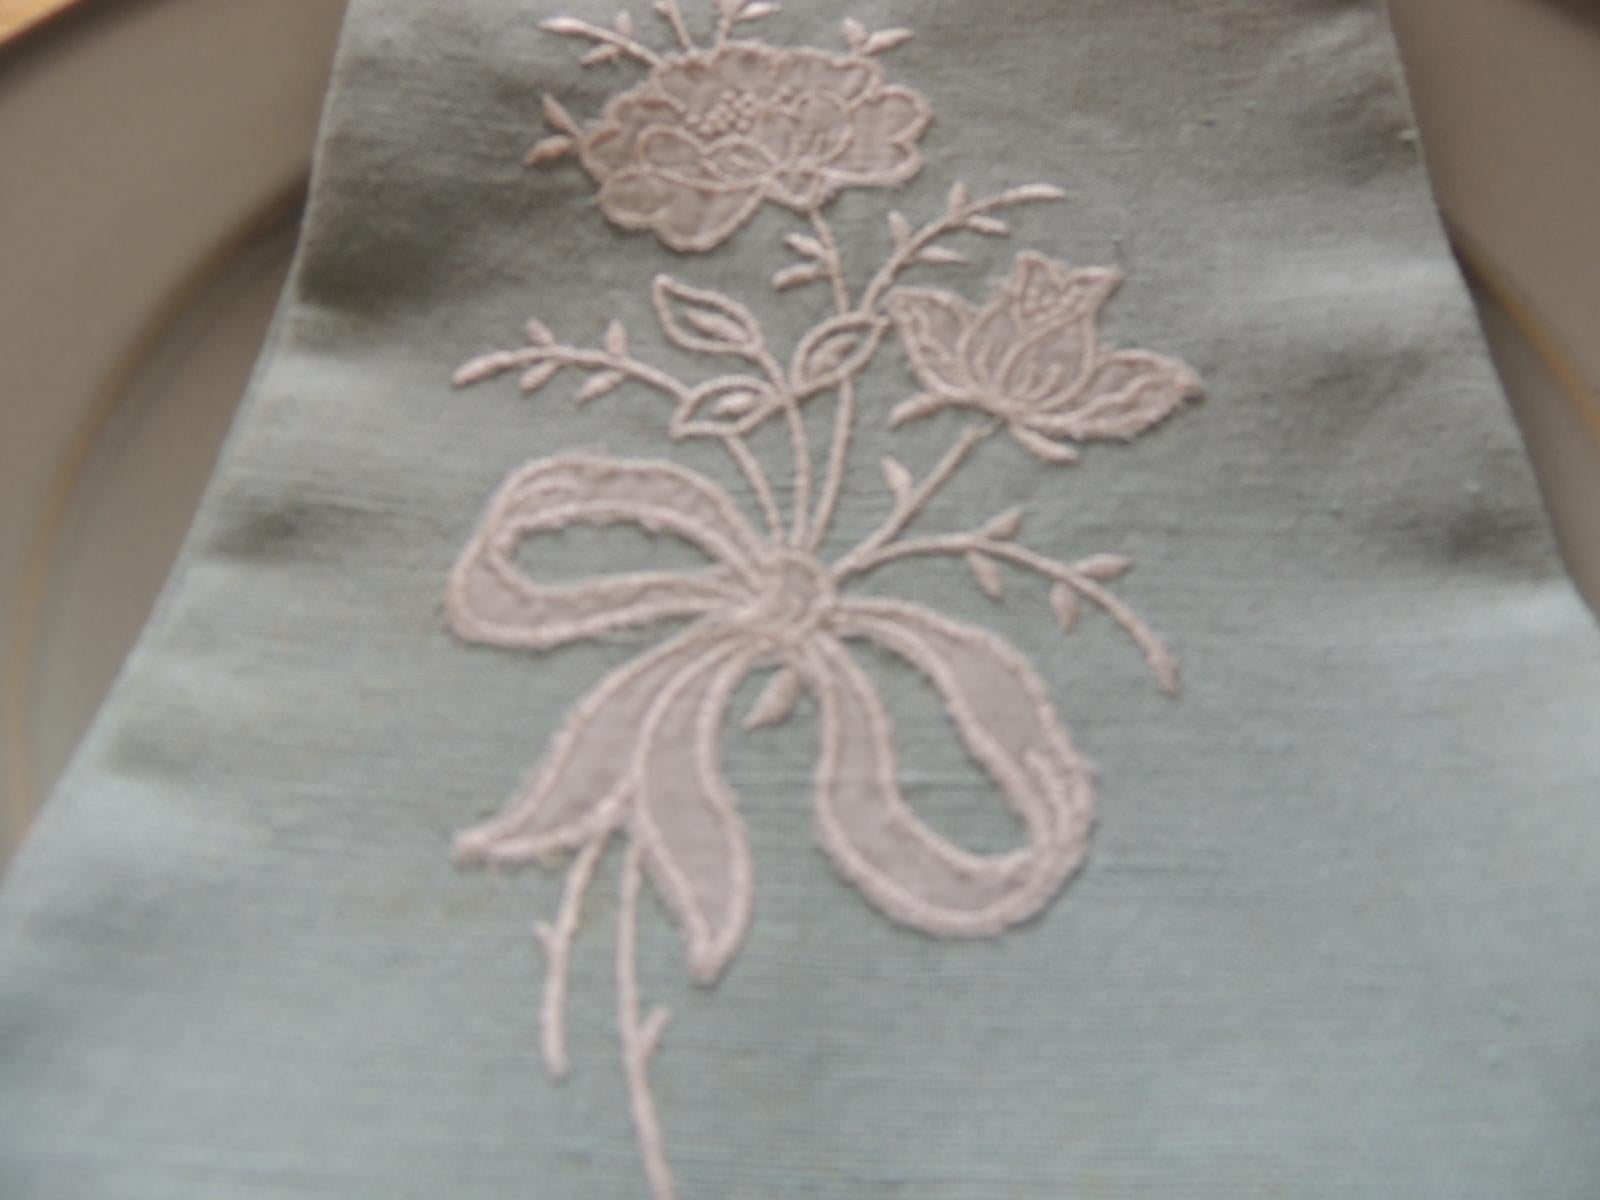 Vintage Green and White Embroidered Flower Linen Guest Towel In Good Condition For Sale In Oakland Park, FL